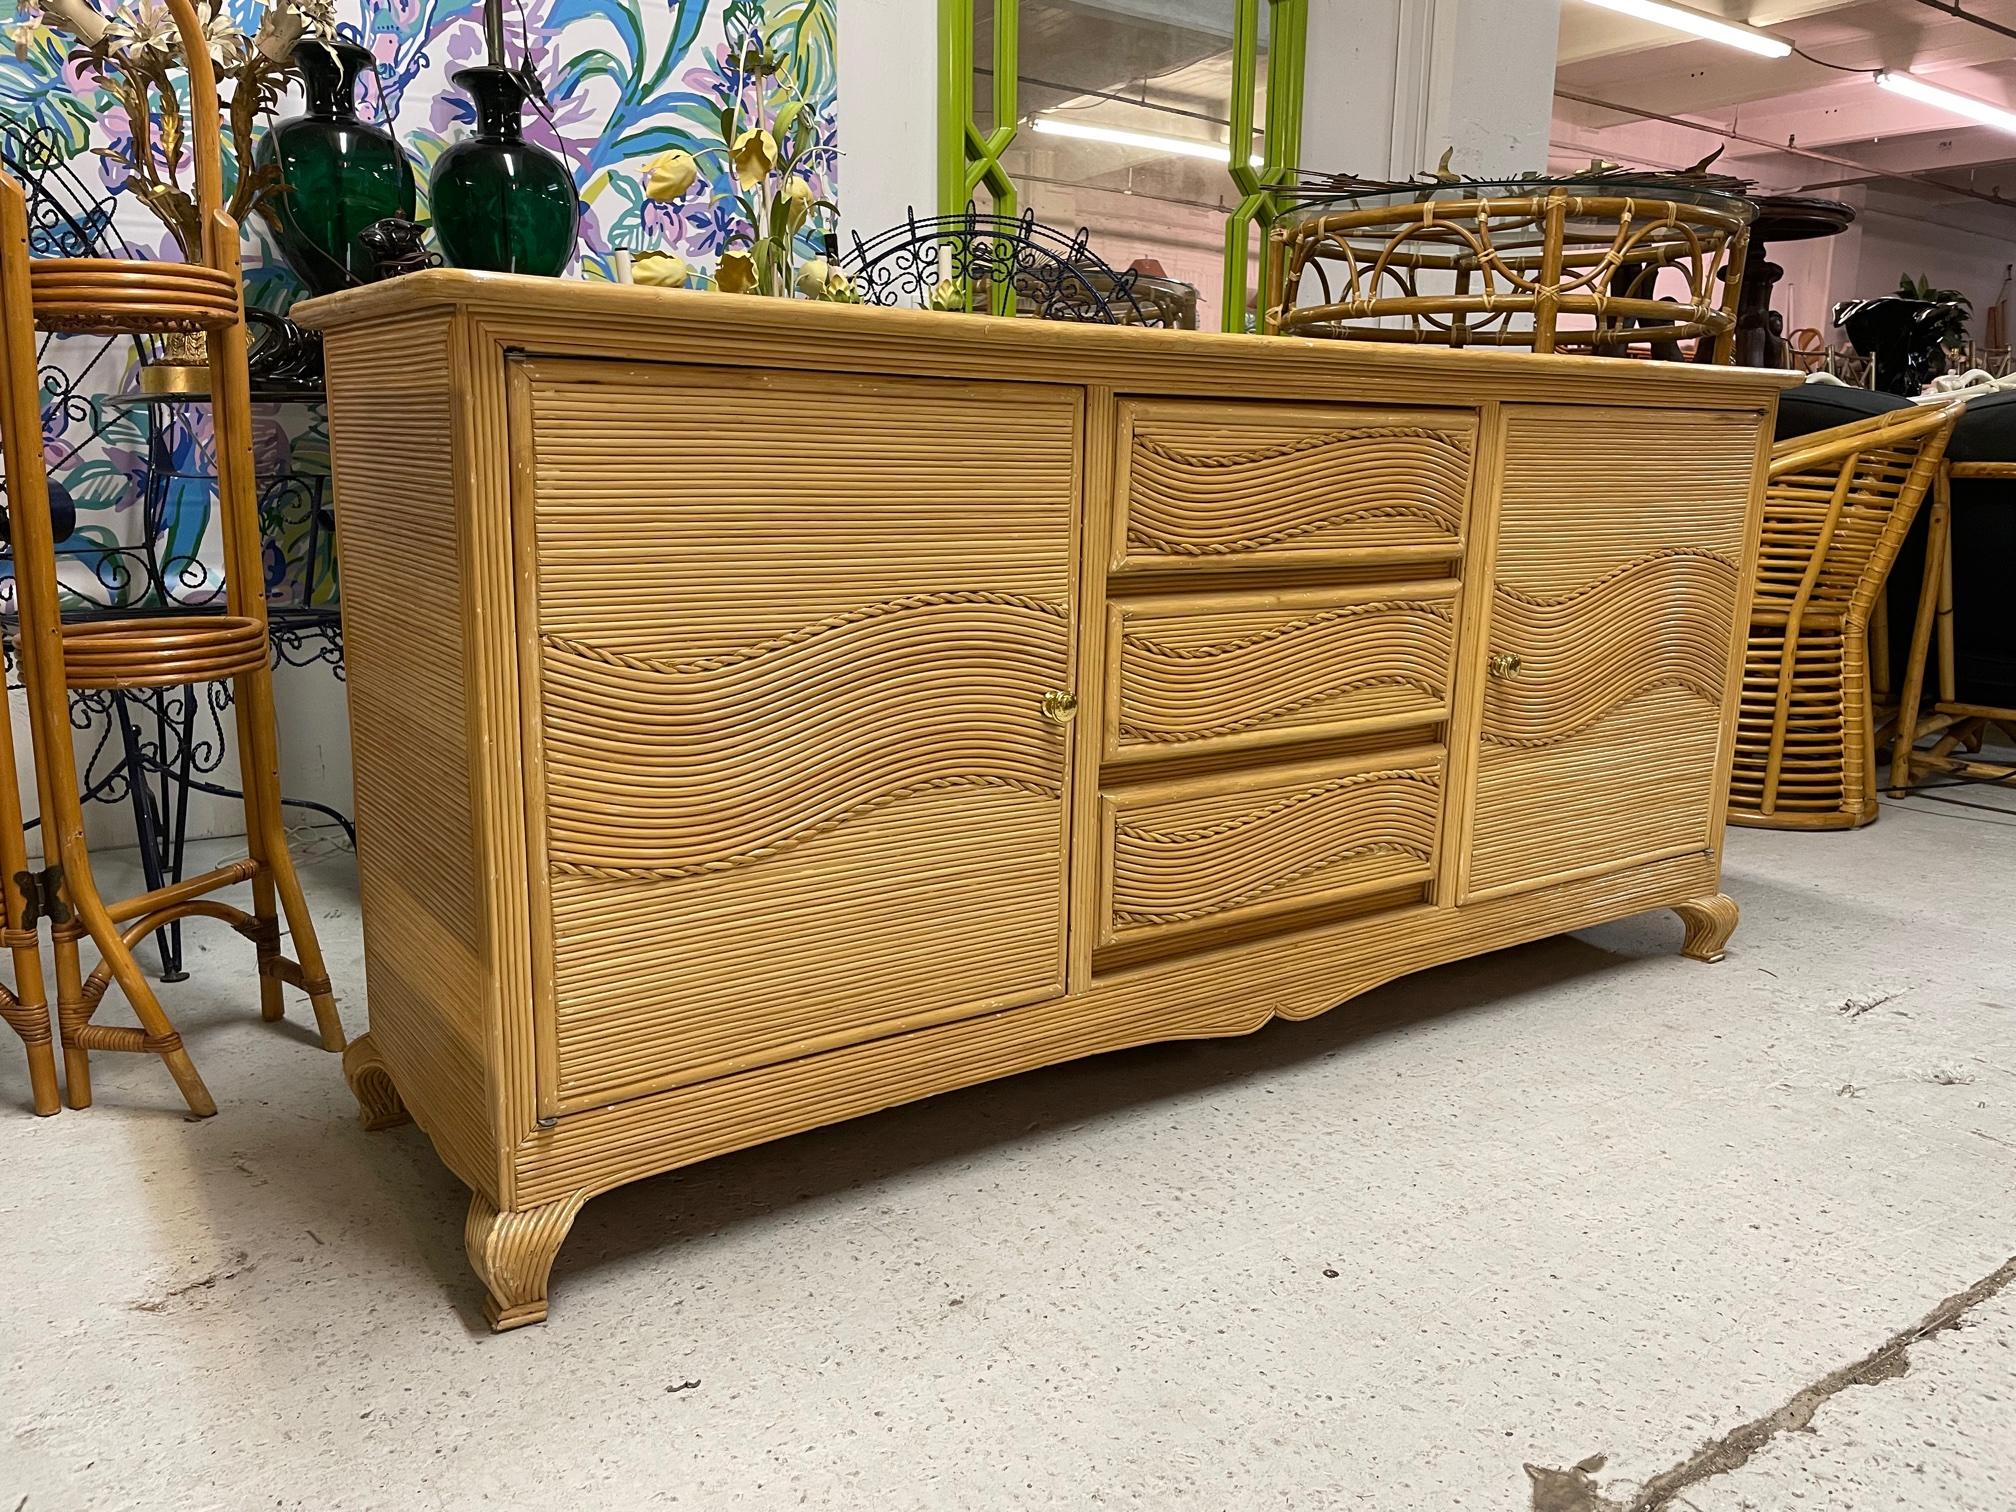 Vintage dresser features full veneer of pencil reed rattan in a unique wave pattern. In the style of Gabriella Crespi or Betty Cobonpue. Brass door pulls and design accents of twisted rope style reeding. Good vintage condition with minor